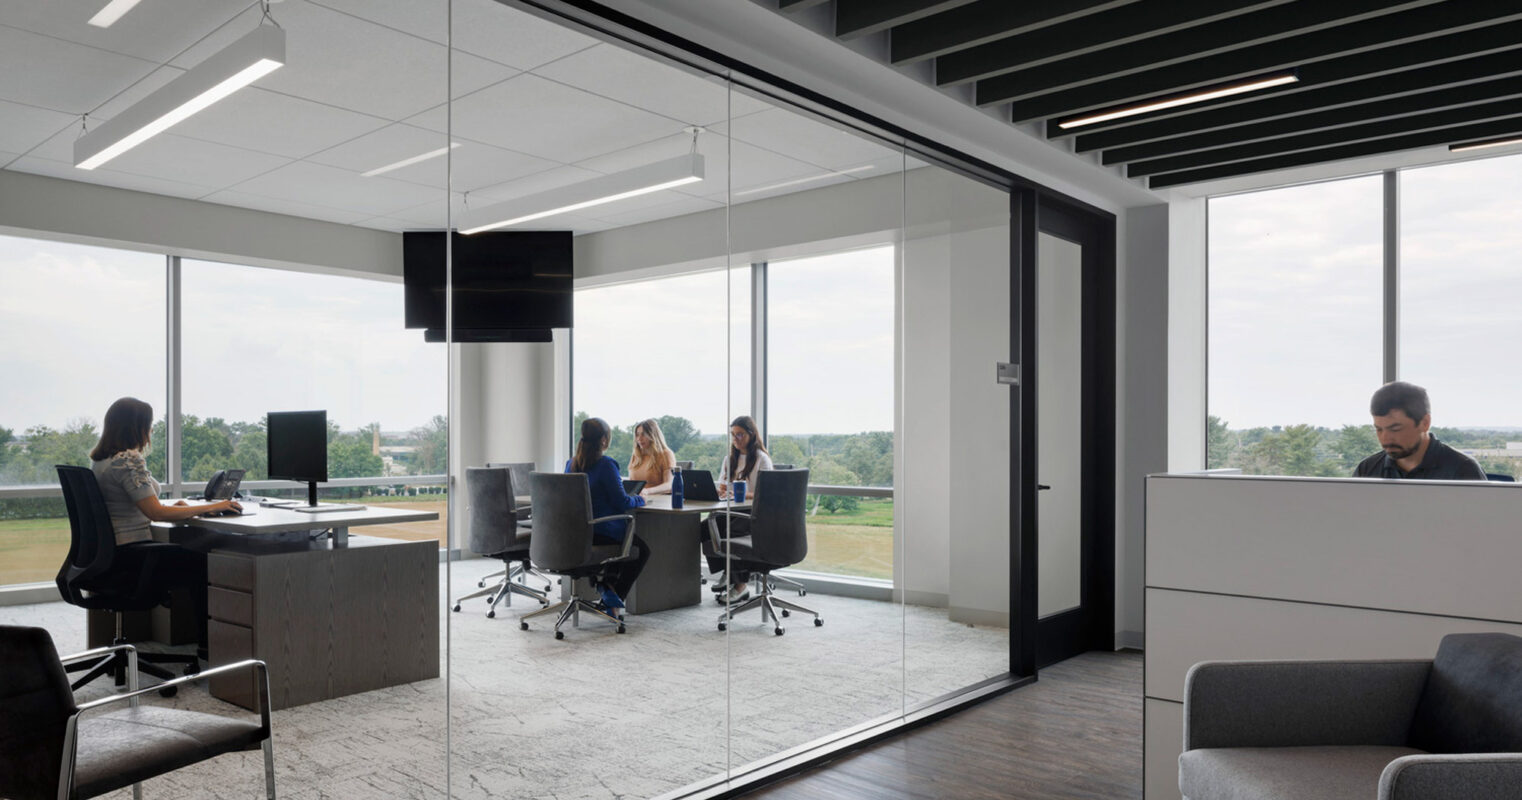 Modern office space featuring a clean, minimalist design with sleek furniture, pendant lighting, and large windows offering ample natural light. Glass walls provide transparency and encourage an open, collaborative environment.